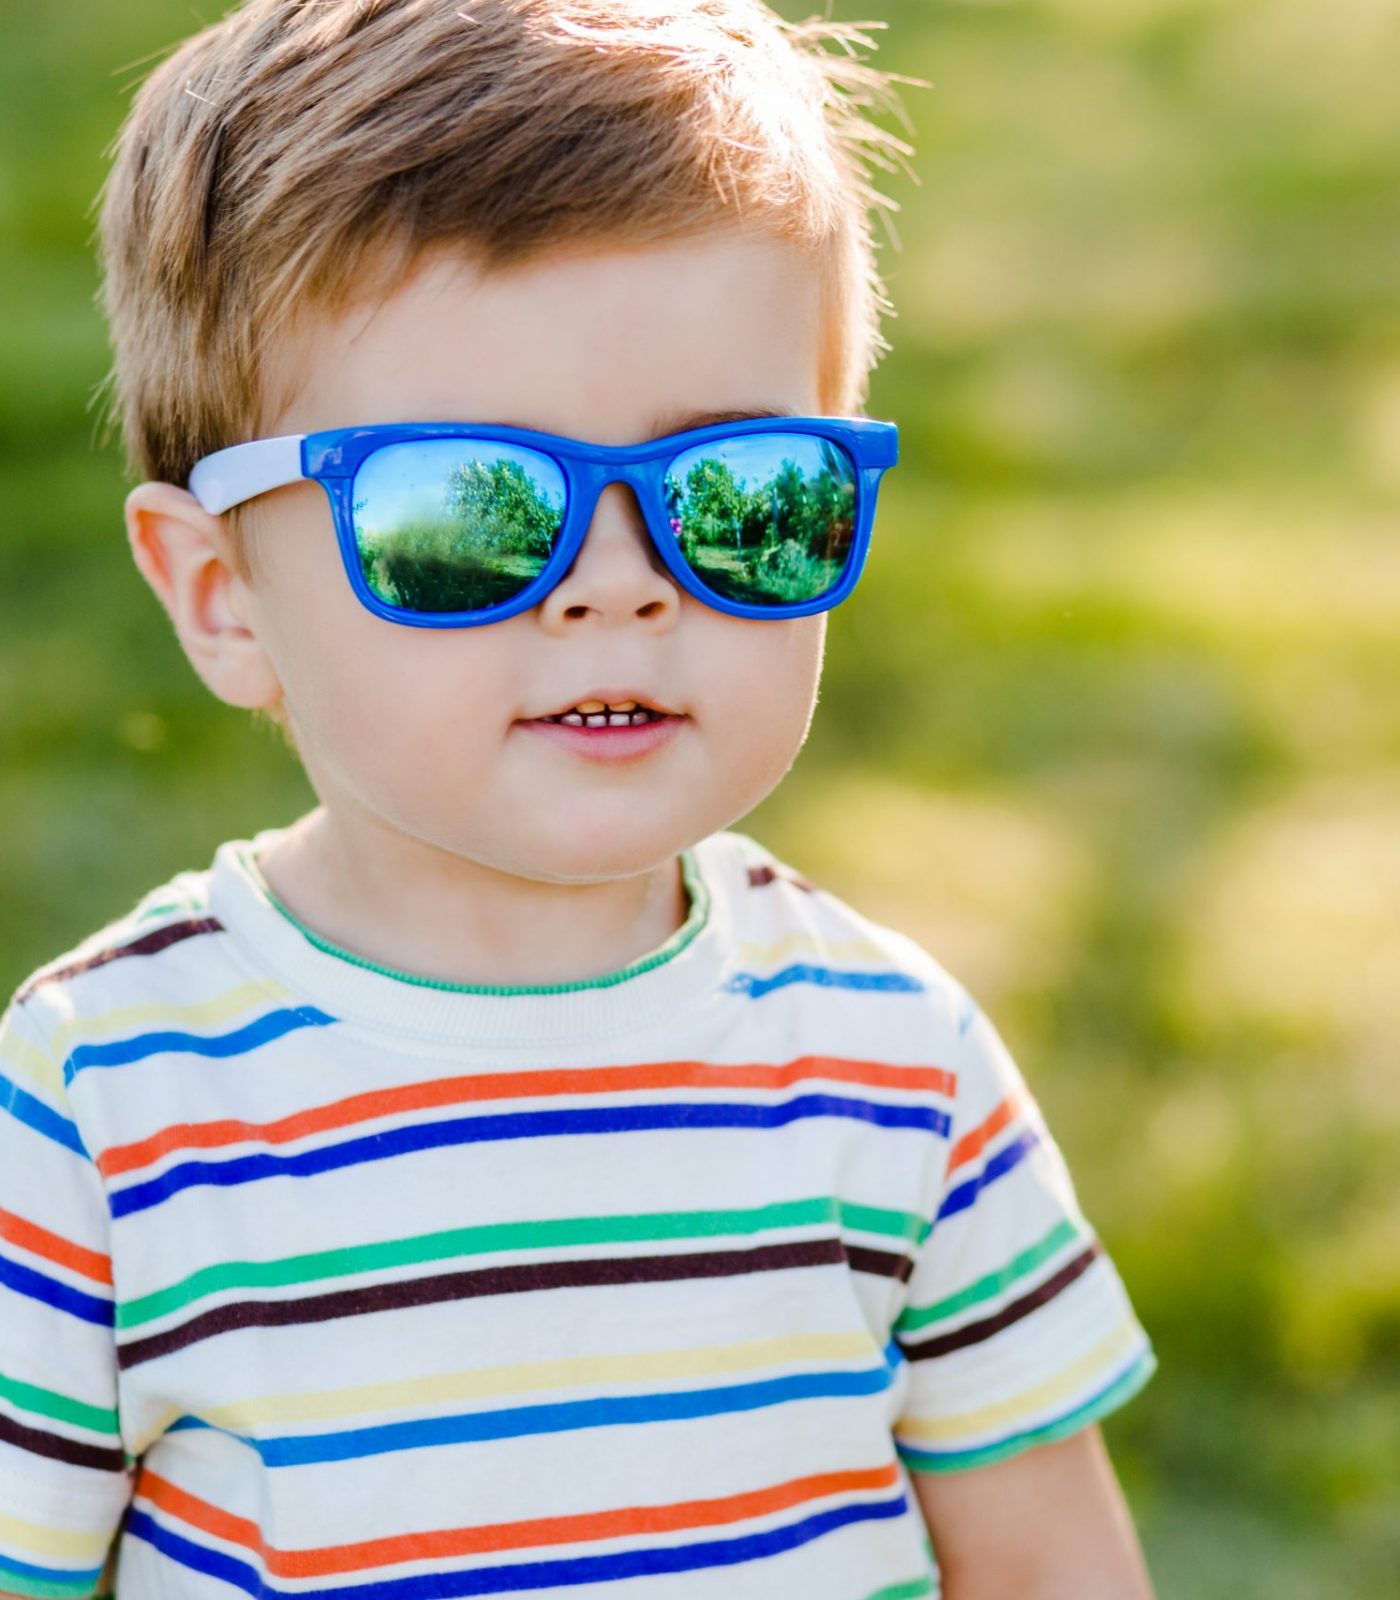 Litttle cute boy staying in the garden in bright sunglasses and smile